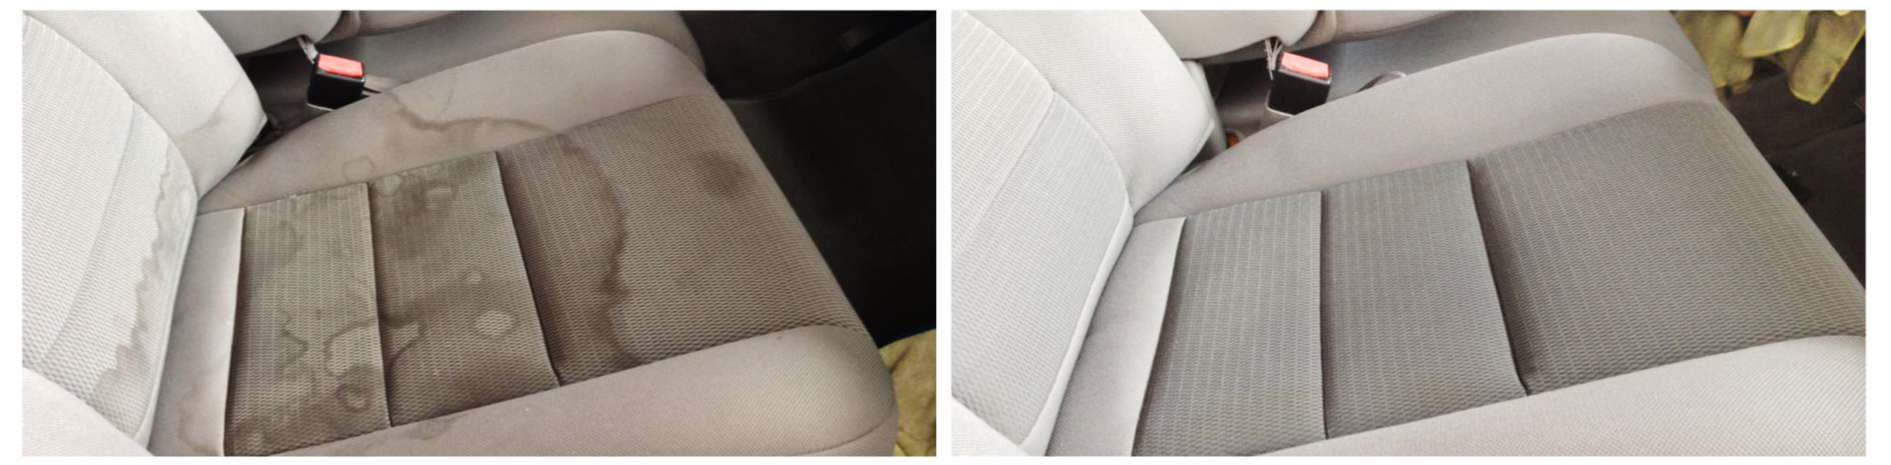 Virginia Auto Detailing Interior Detailing Before and After.jpg